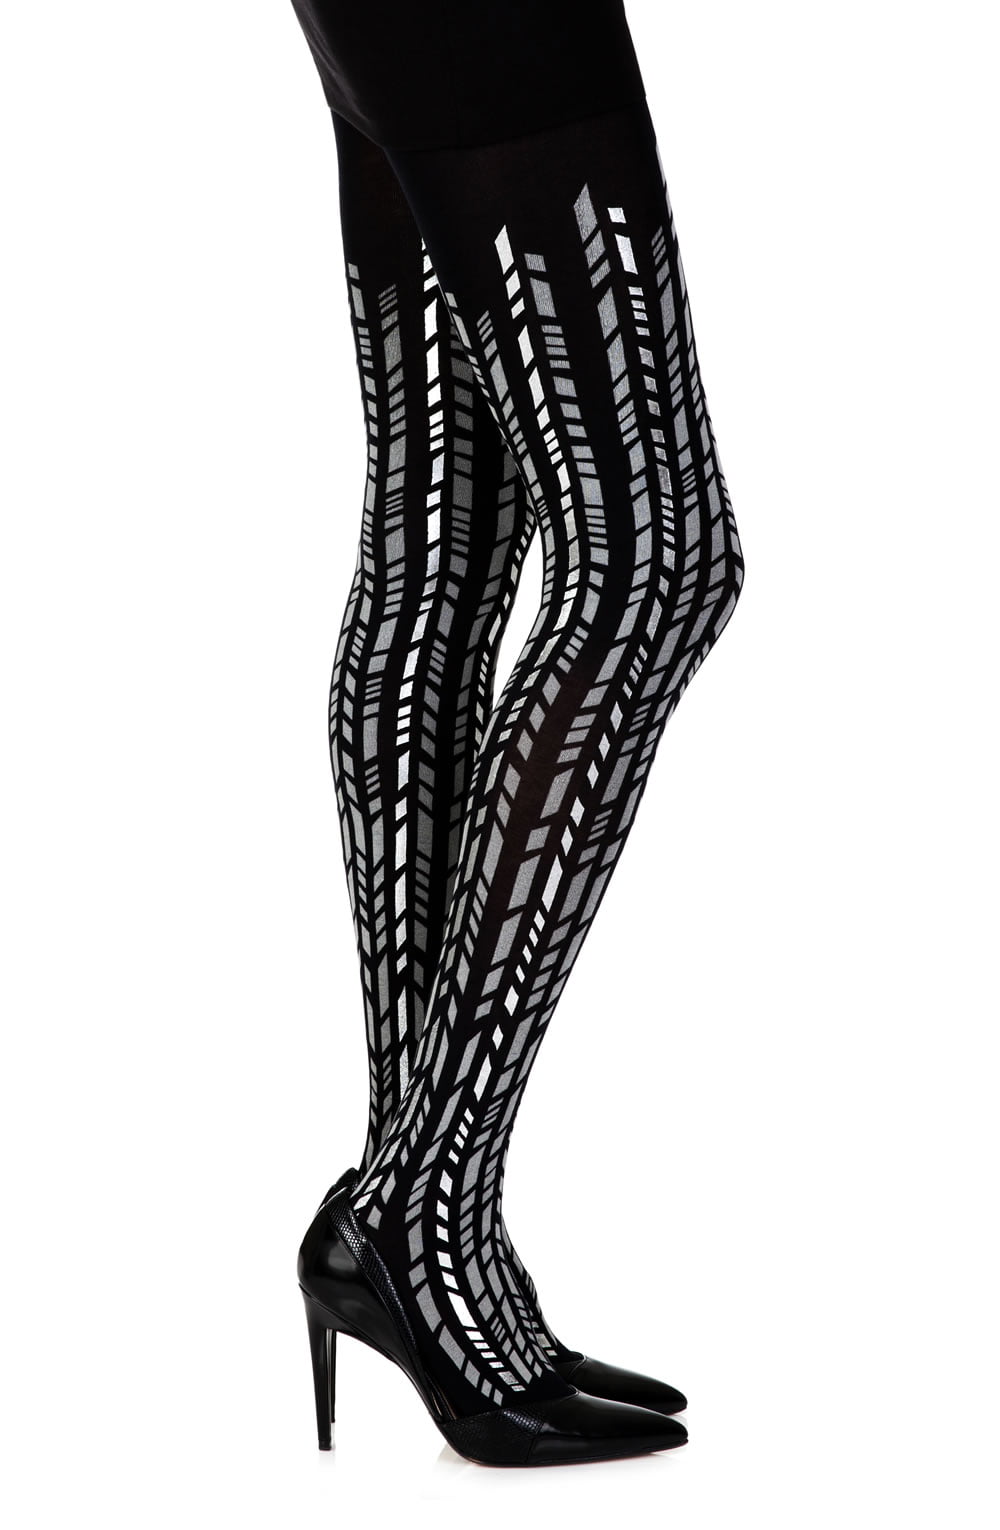 Vibrators, Sex Toy Kits and Sex Toys at Cloud9Adults - Zohara "Cross It" Black/Silver Print Tights - Buy Sex Toys Online